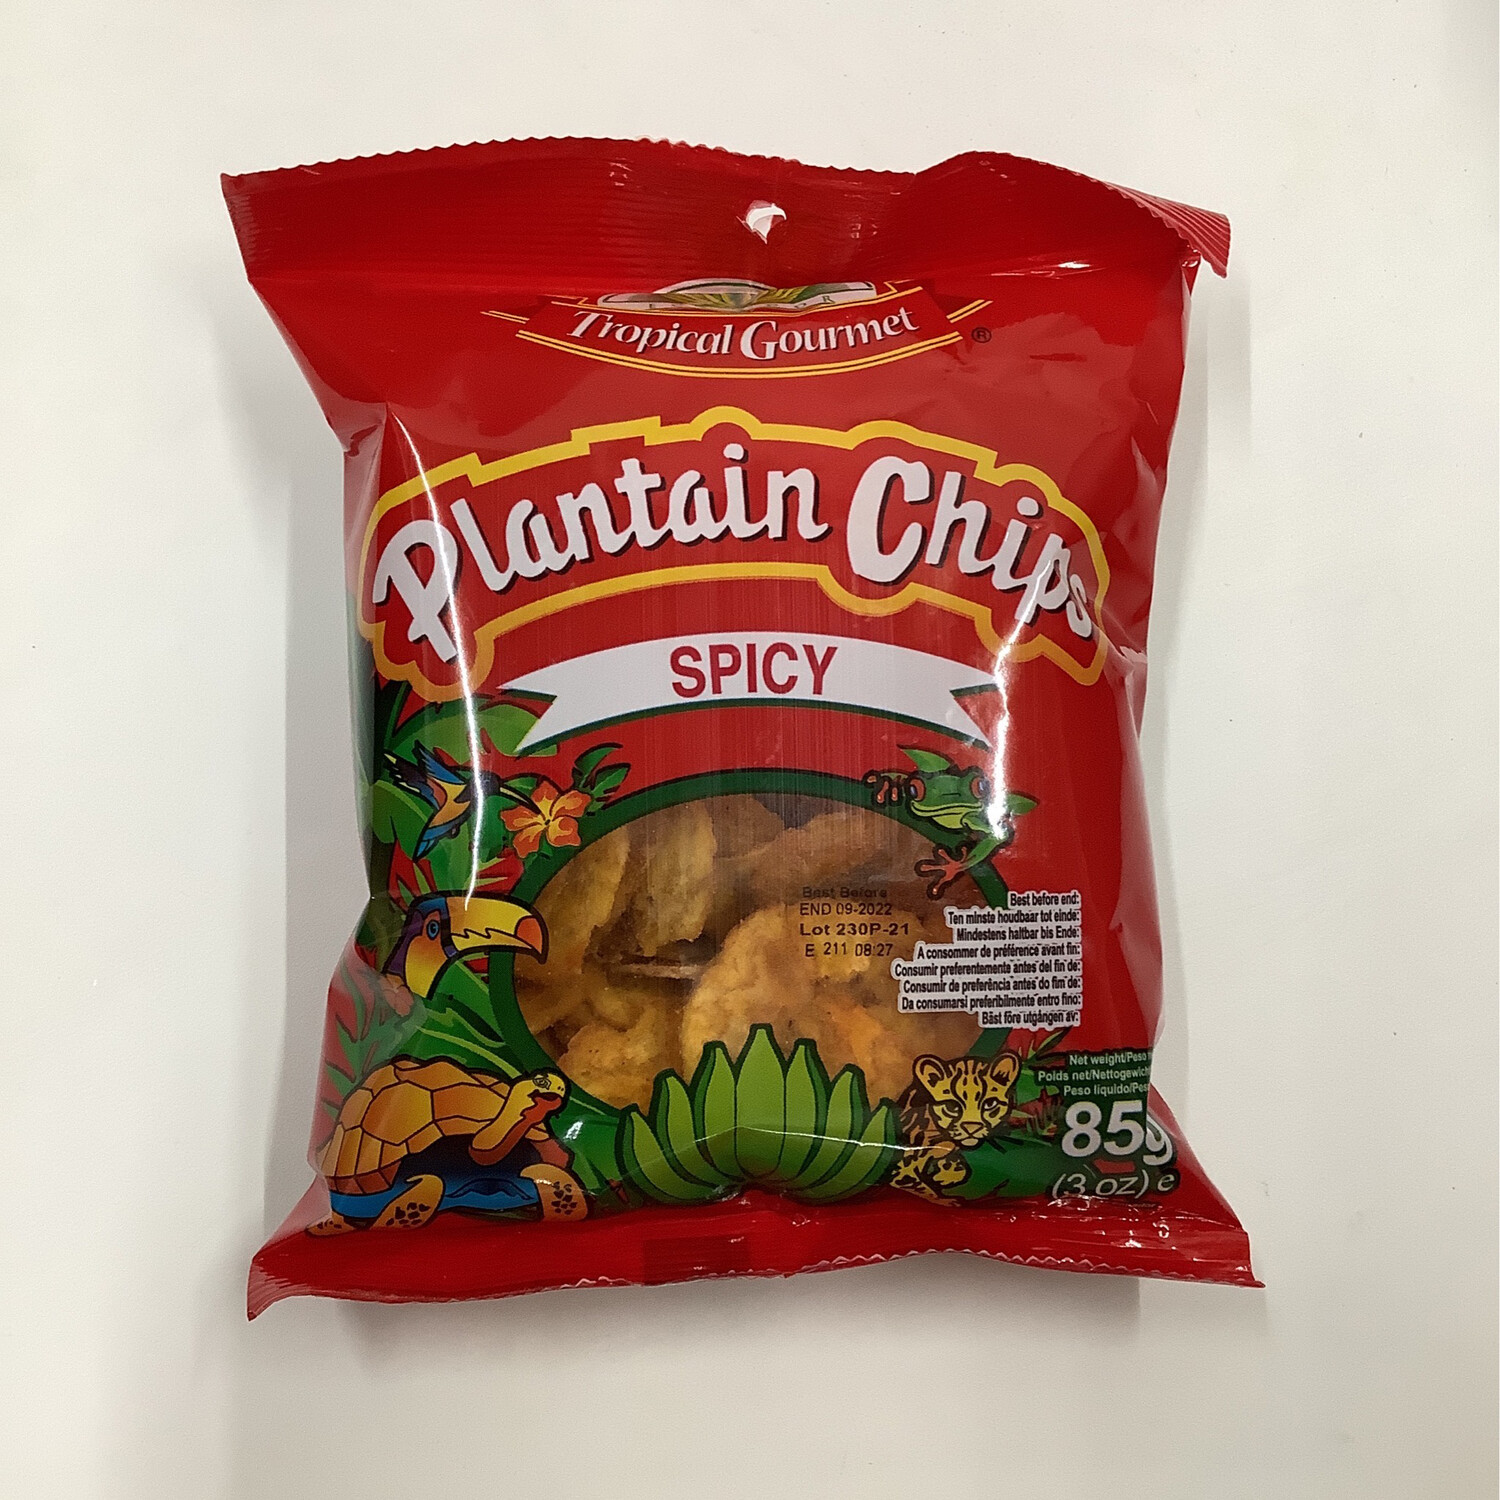 Tropical Gourmet Plantain Chips Spicy 85g